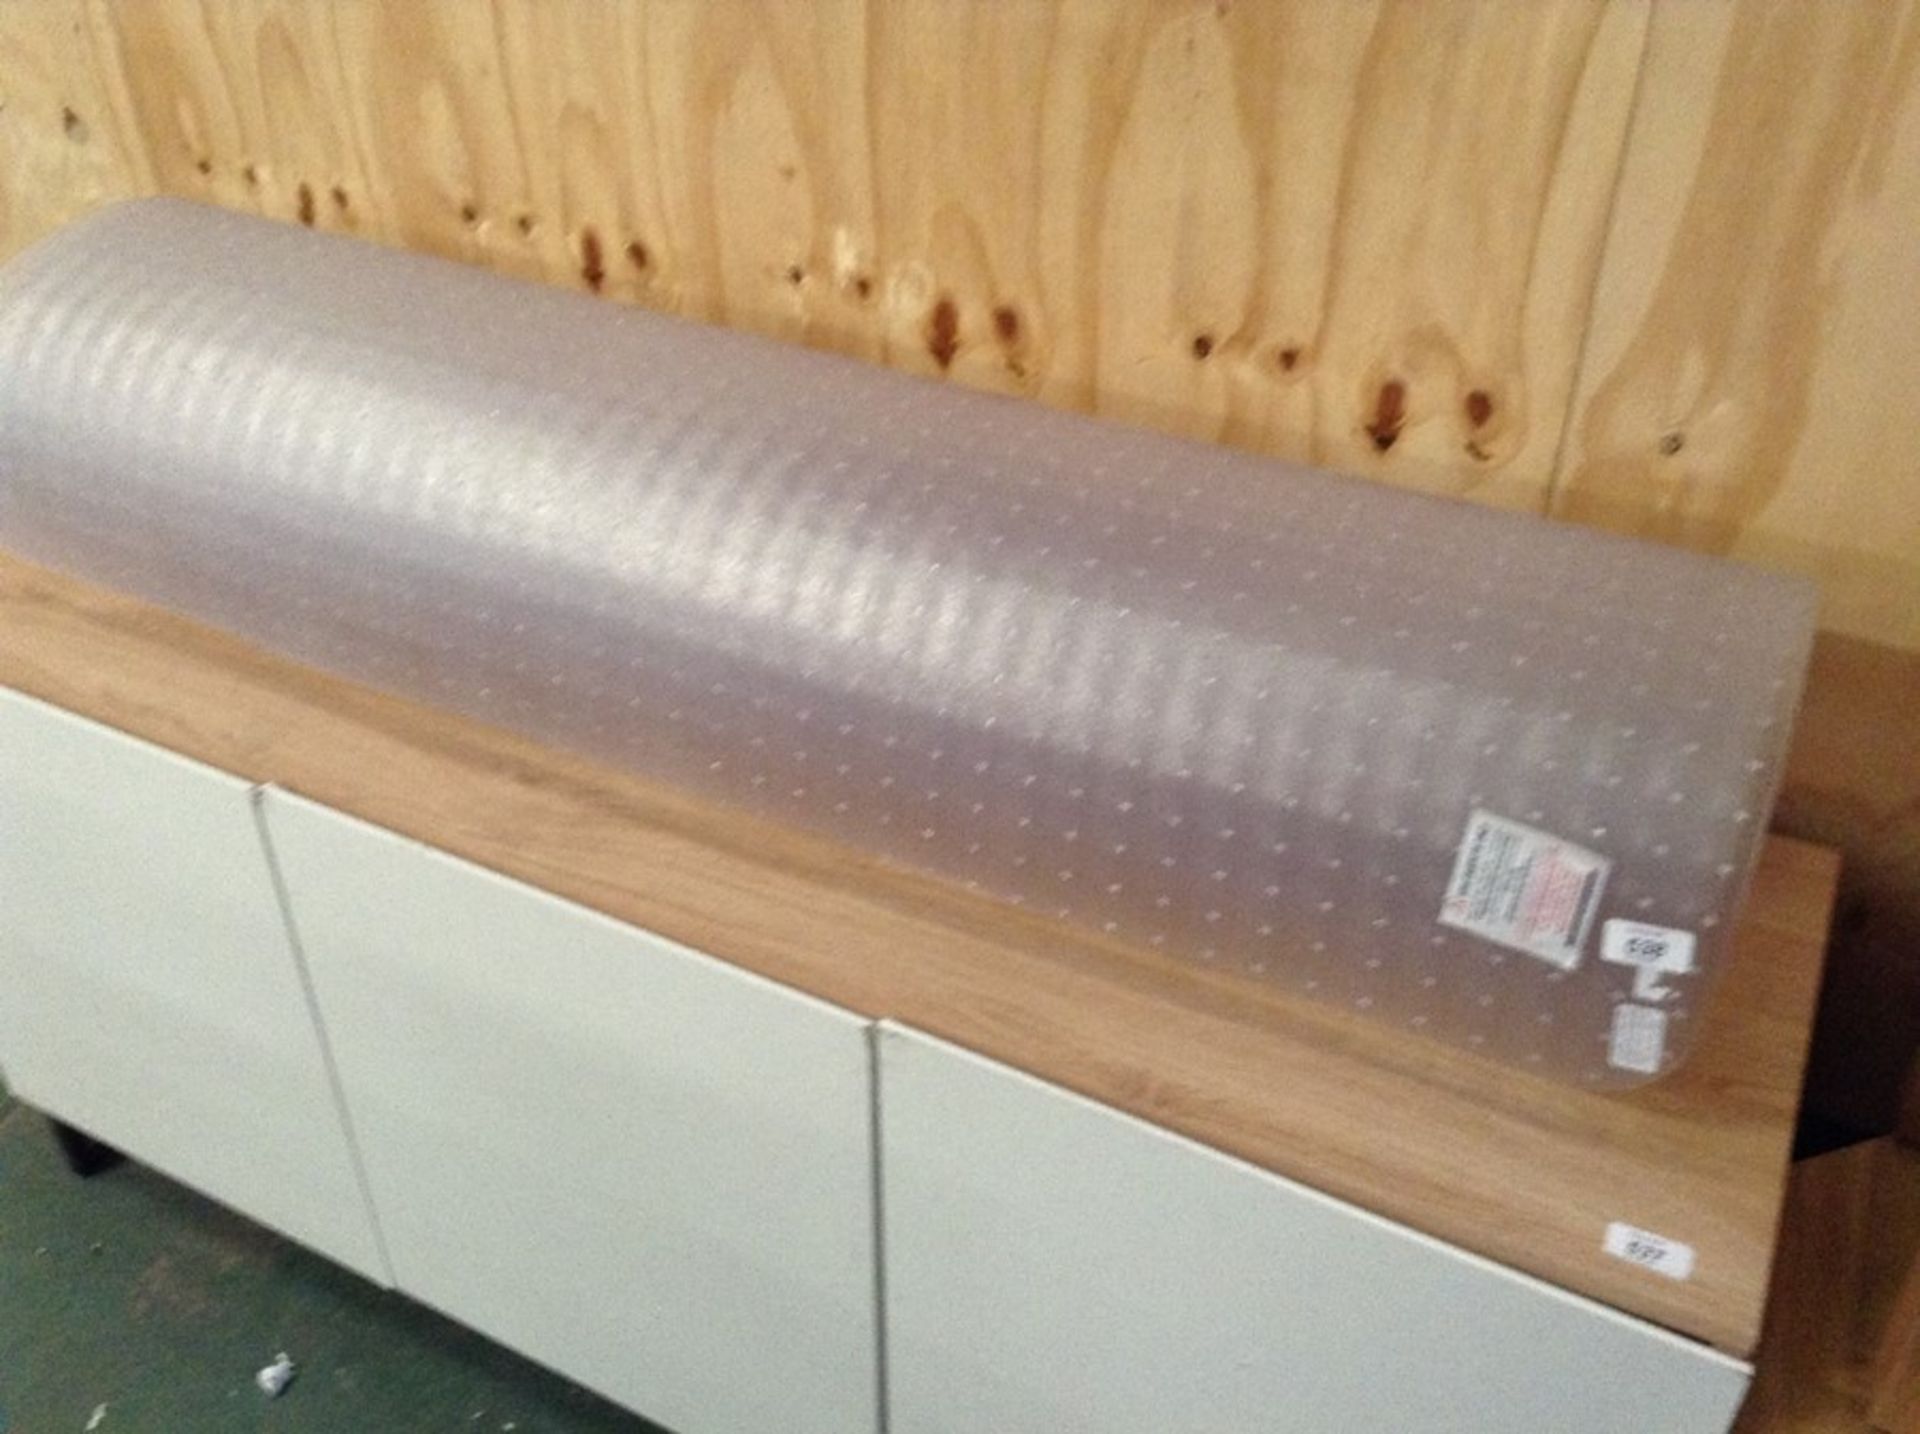 ROLLED UP PLASTIC FLOOR PROTECTER(H17228 - 12/14 HGKS1111.43136874)